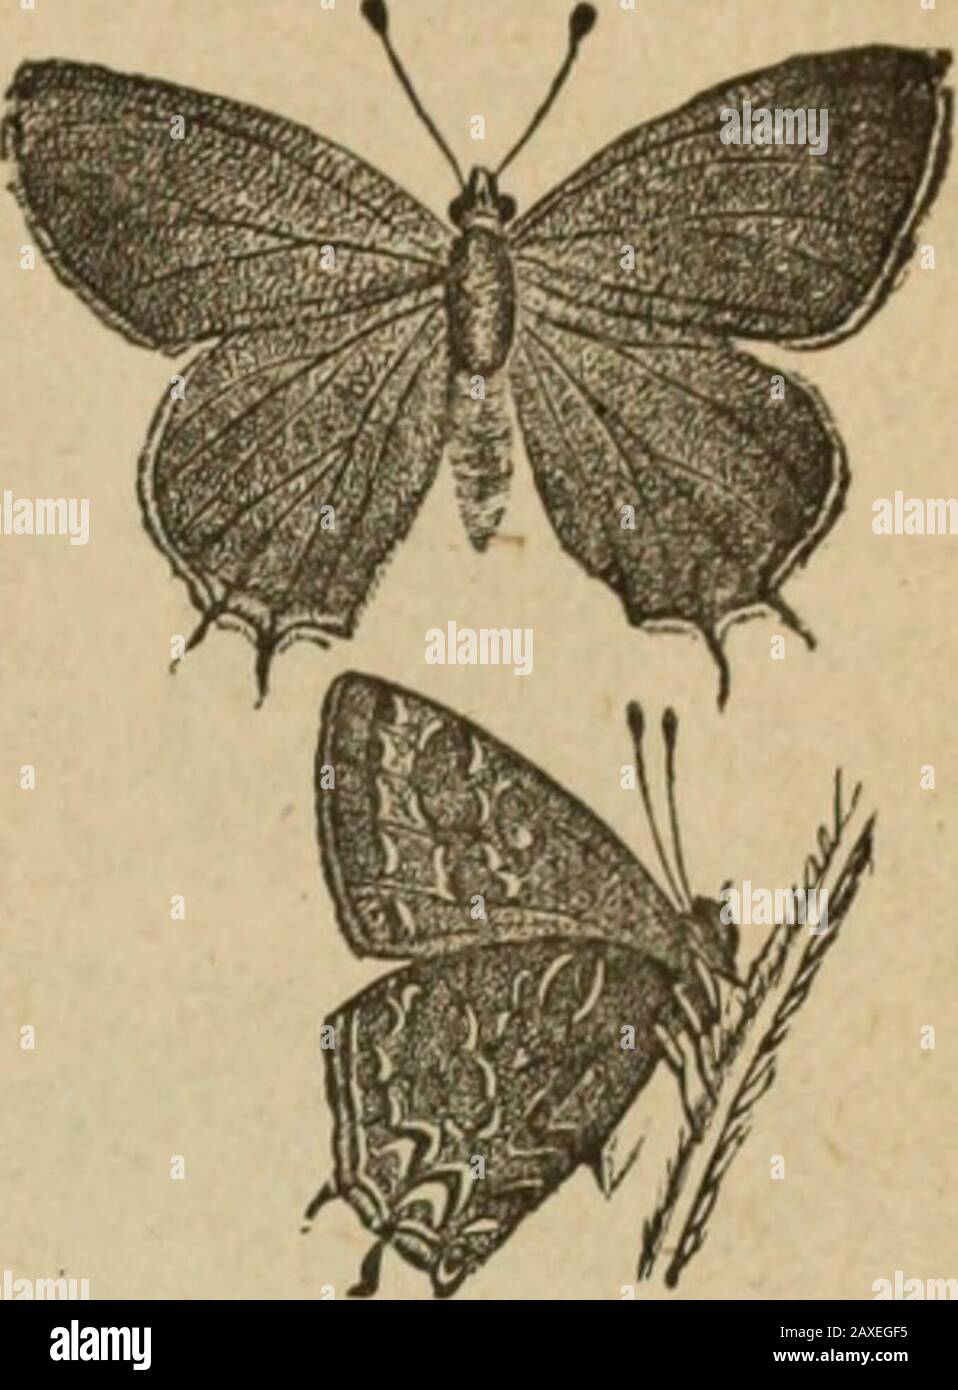 Annual report of the Fruit Growers' Association of Ontario, 1896 . meadowsin July (C. E. Grant); Truro, N. S.; and Lower Stewiacke, N. S. (H. Piers). 38. Neonympha Eurytris, i^a6r.—Orillia, common in open woods in June (0. E.Grant). 42. Satyrus Alope, i^aftr.—Niagara Falls, Ont., July 14, 1896 (A. Gibson); Truro,N. S., rare (Miss Eaton). 45 Libythea Bachmani, Kirtl.—Taken in Toronto in 1895, and June 7, 1896, byMr. McDonagh. Fig. 90. 46 Thecla Acadica, Edw.—Orillia, usually rare, but very abundant in July, 1896,when forty specimens were taken by Mr. Grant; Toronto, June and July (0. T. Hills). Stock Photo